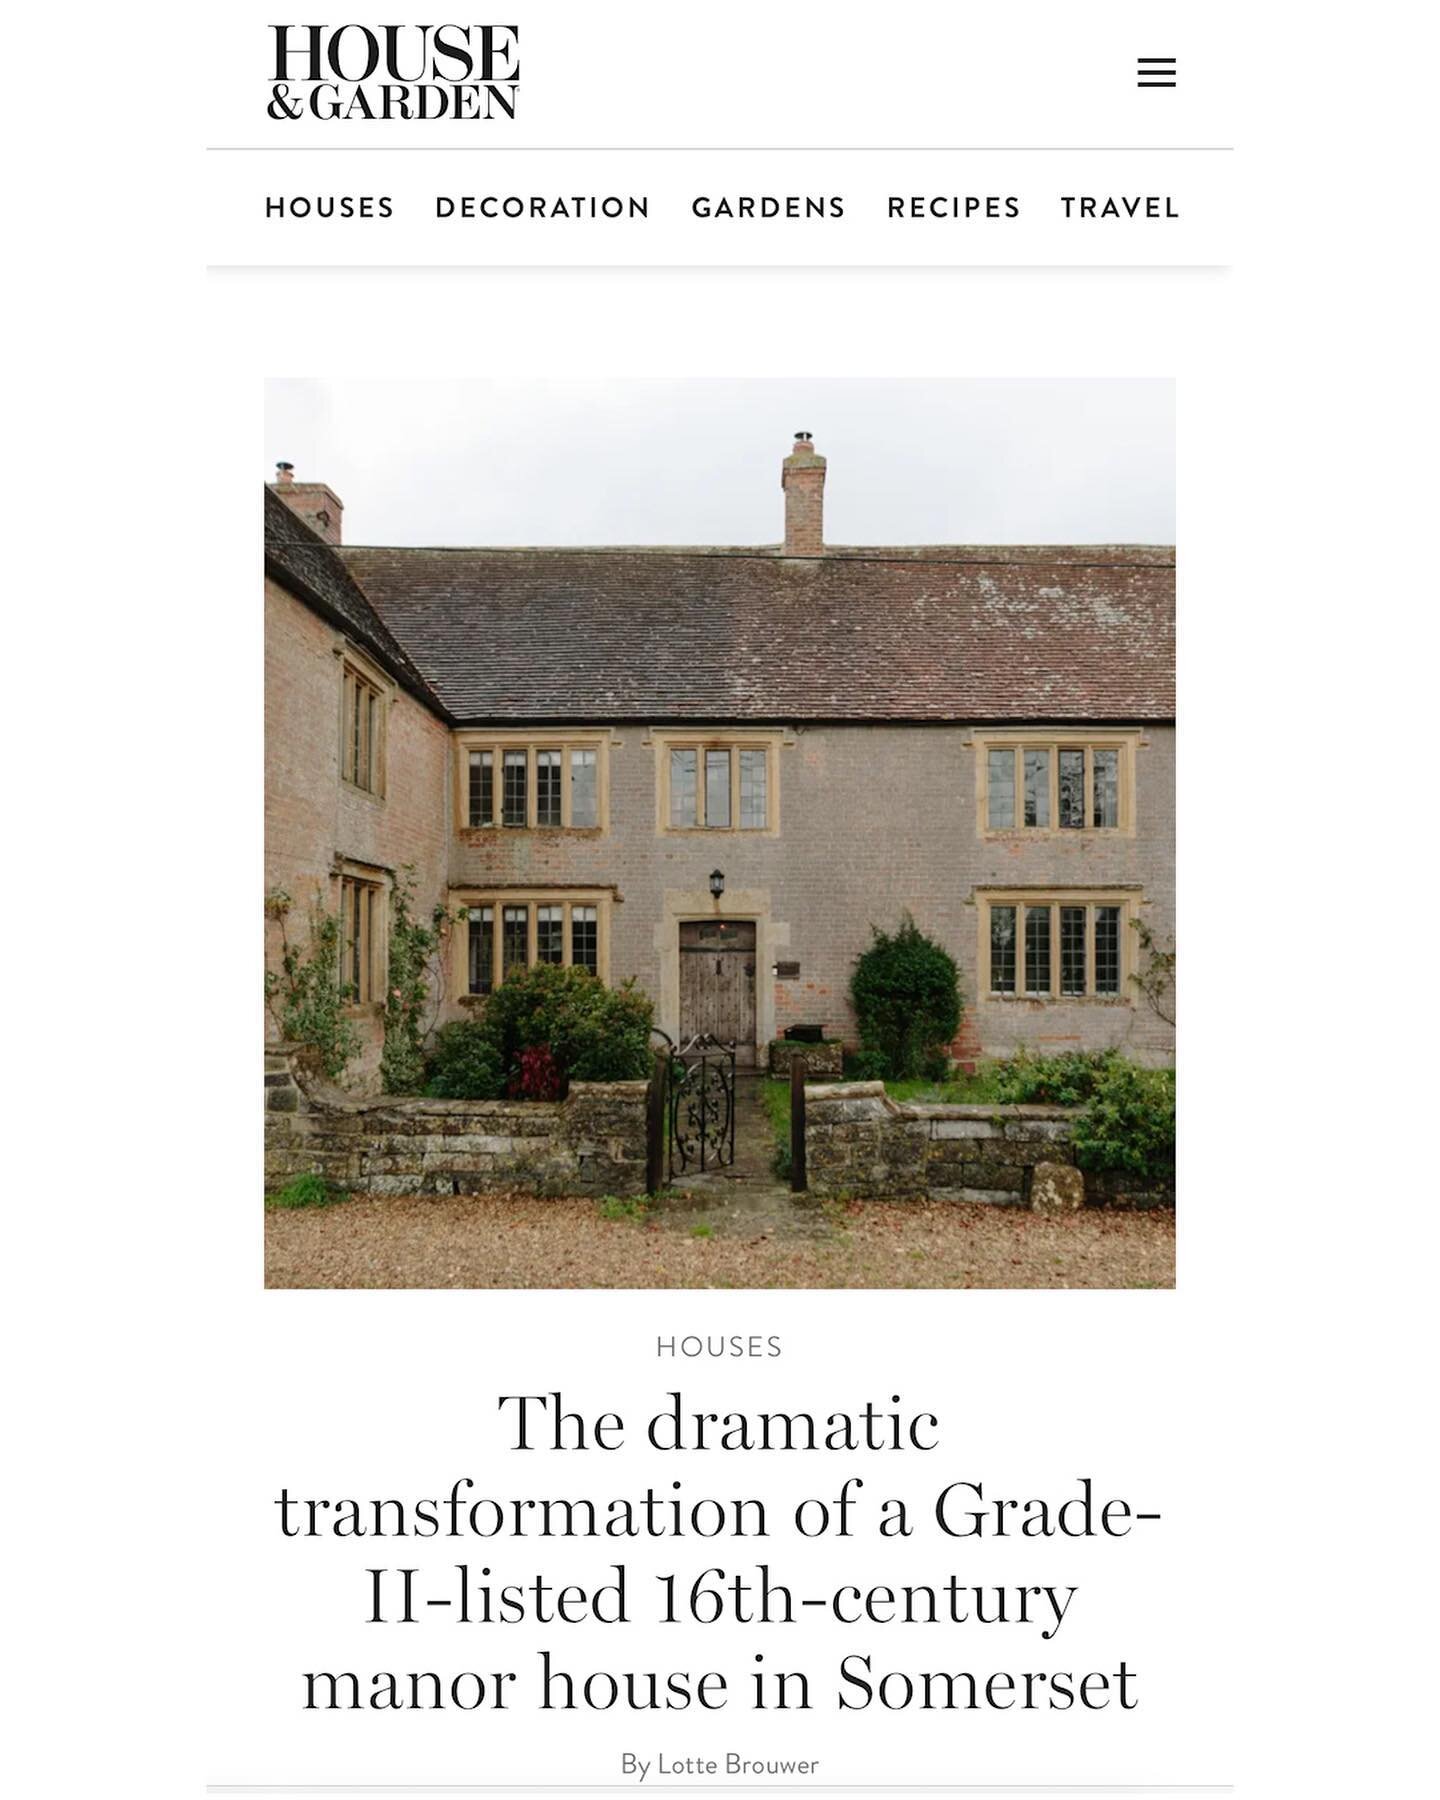 I couldn&rsquo;t be happier that our Manor House project has been featured in @houseandgarden
Thank you so much @iamlottebrouwer @ginnyemily 🙏❤️#houseandgarden#sarahsouthwelldesign Thanks to everyone who made this huge project possible, I&rsquo;m th